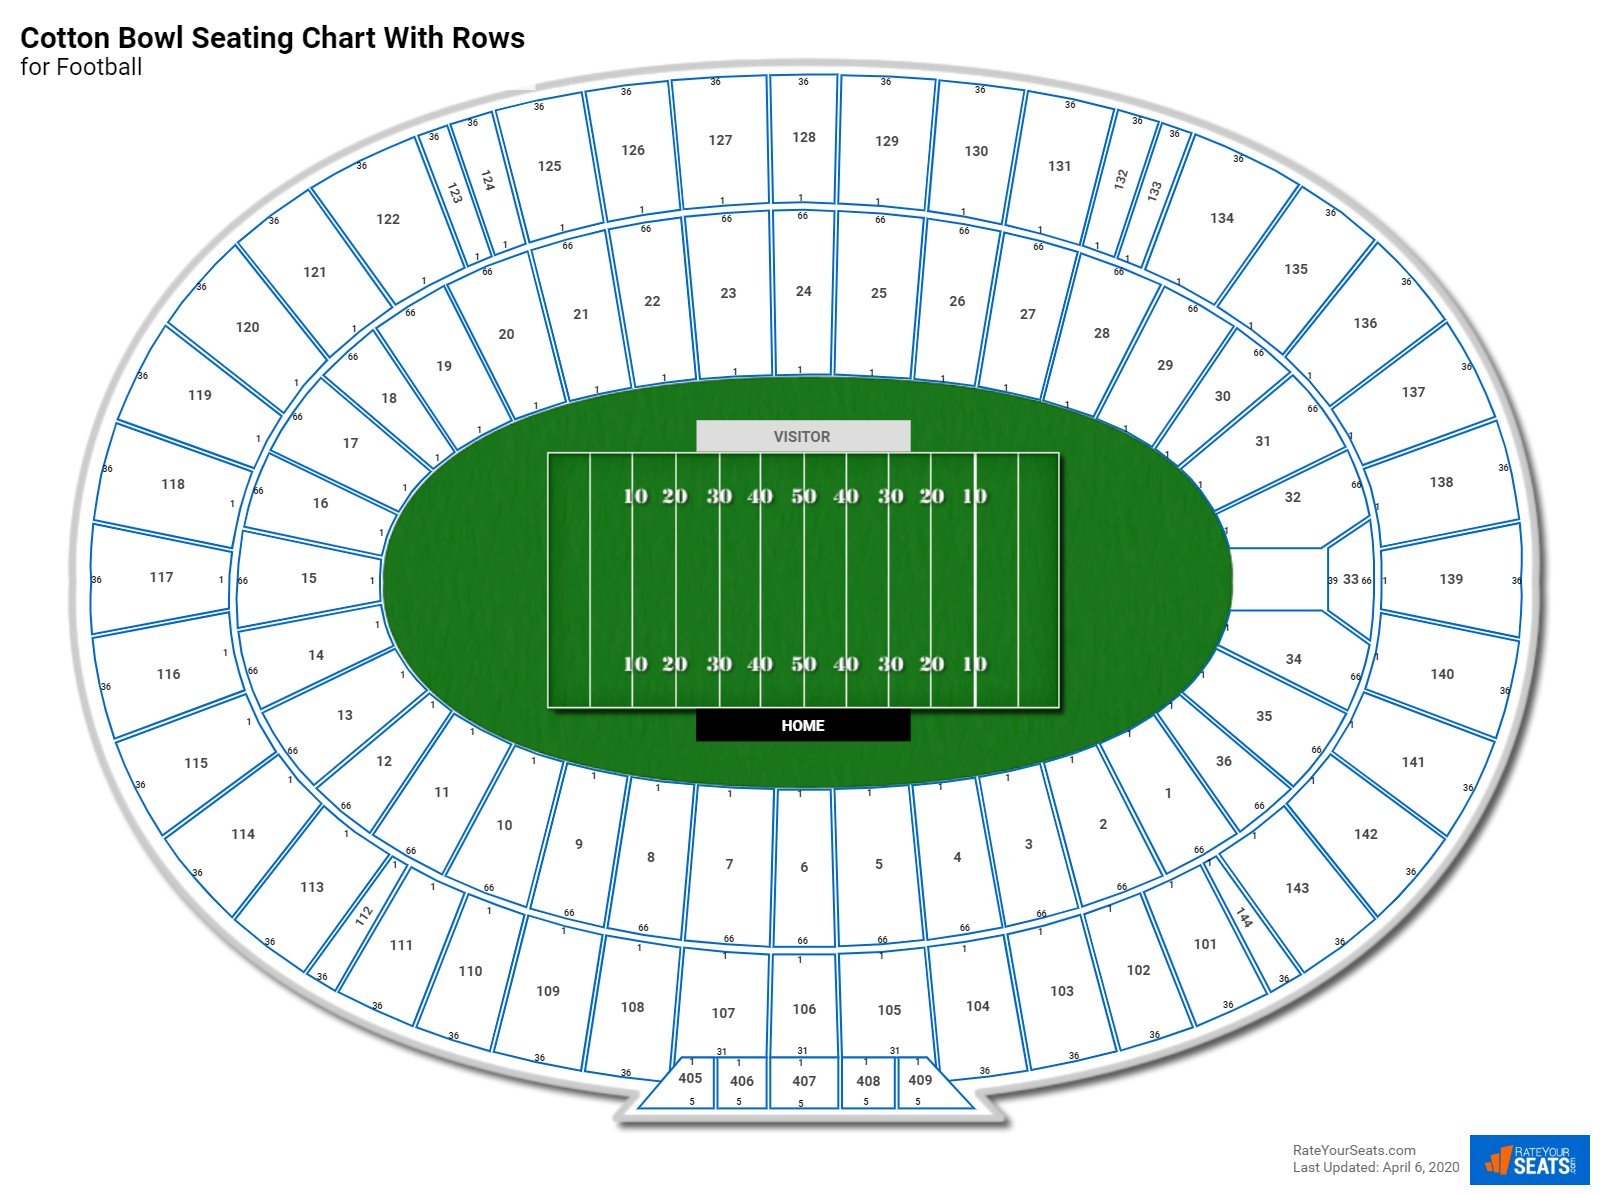 Cotton Bowl seating chart with row numbers